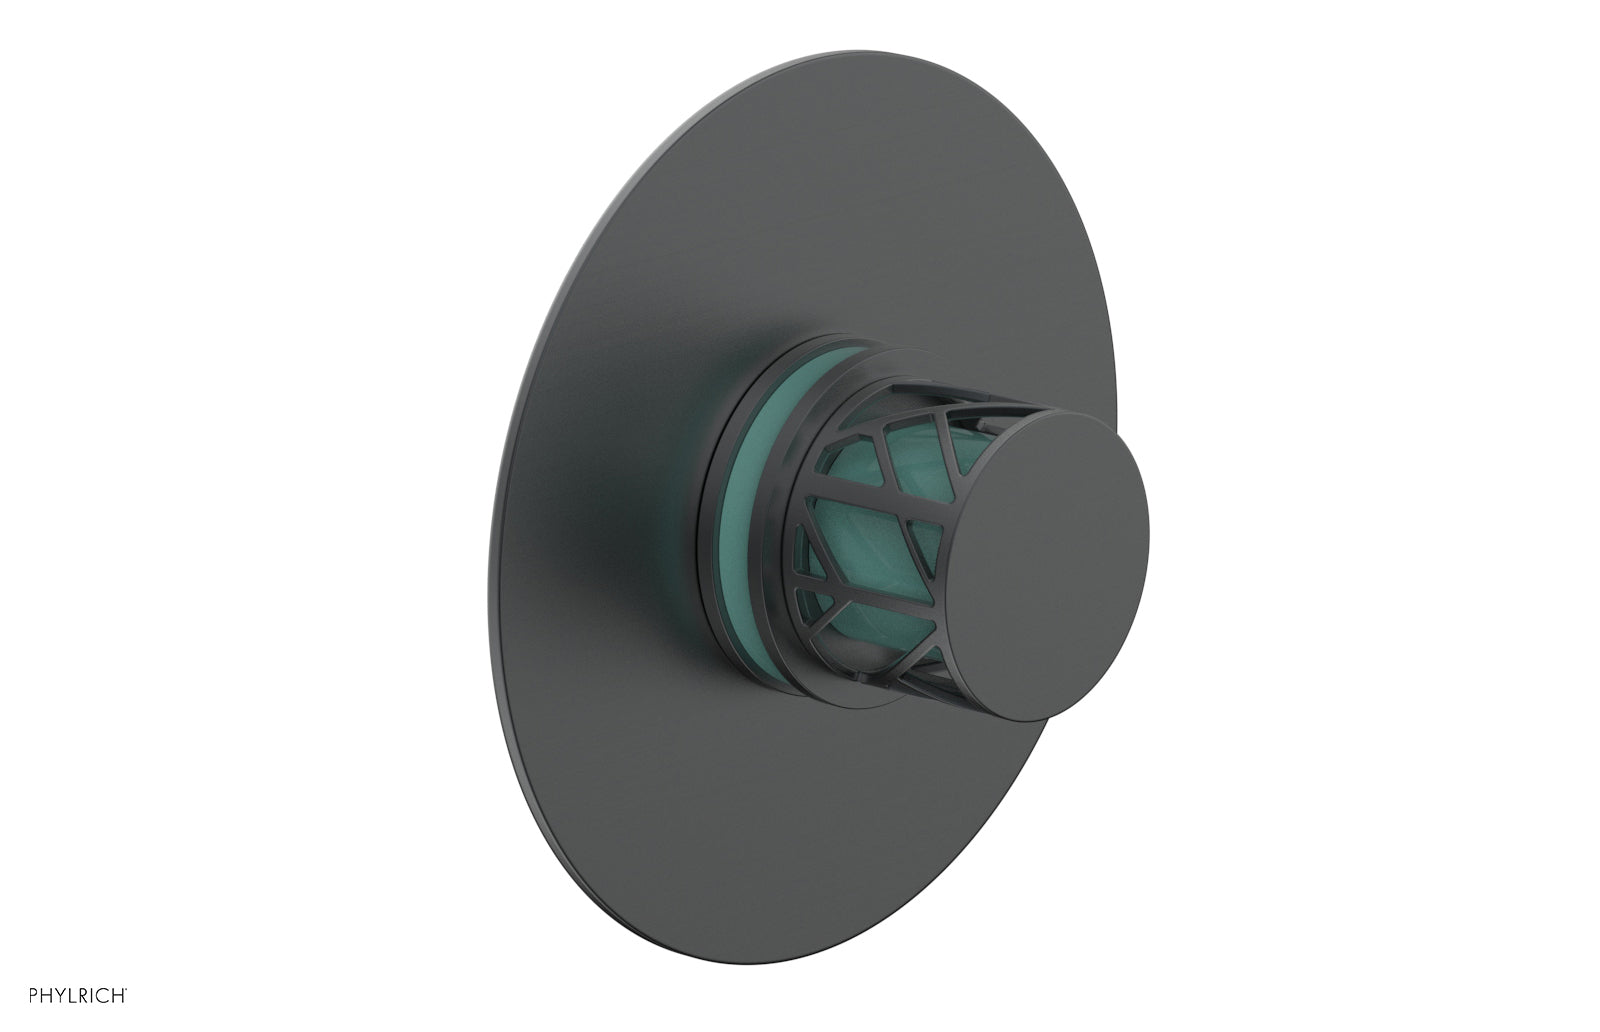 Phylrich JOLIE Thermostatic Shower Trim, Round Handle with "Turquoise" Accents